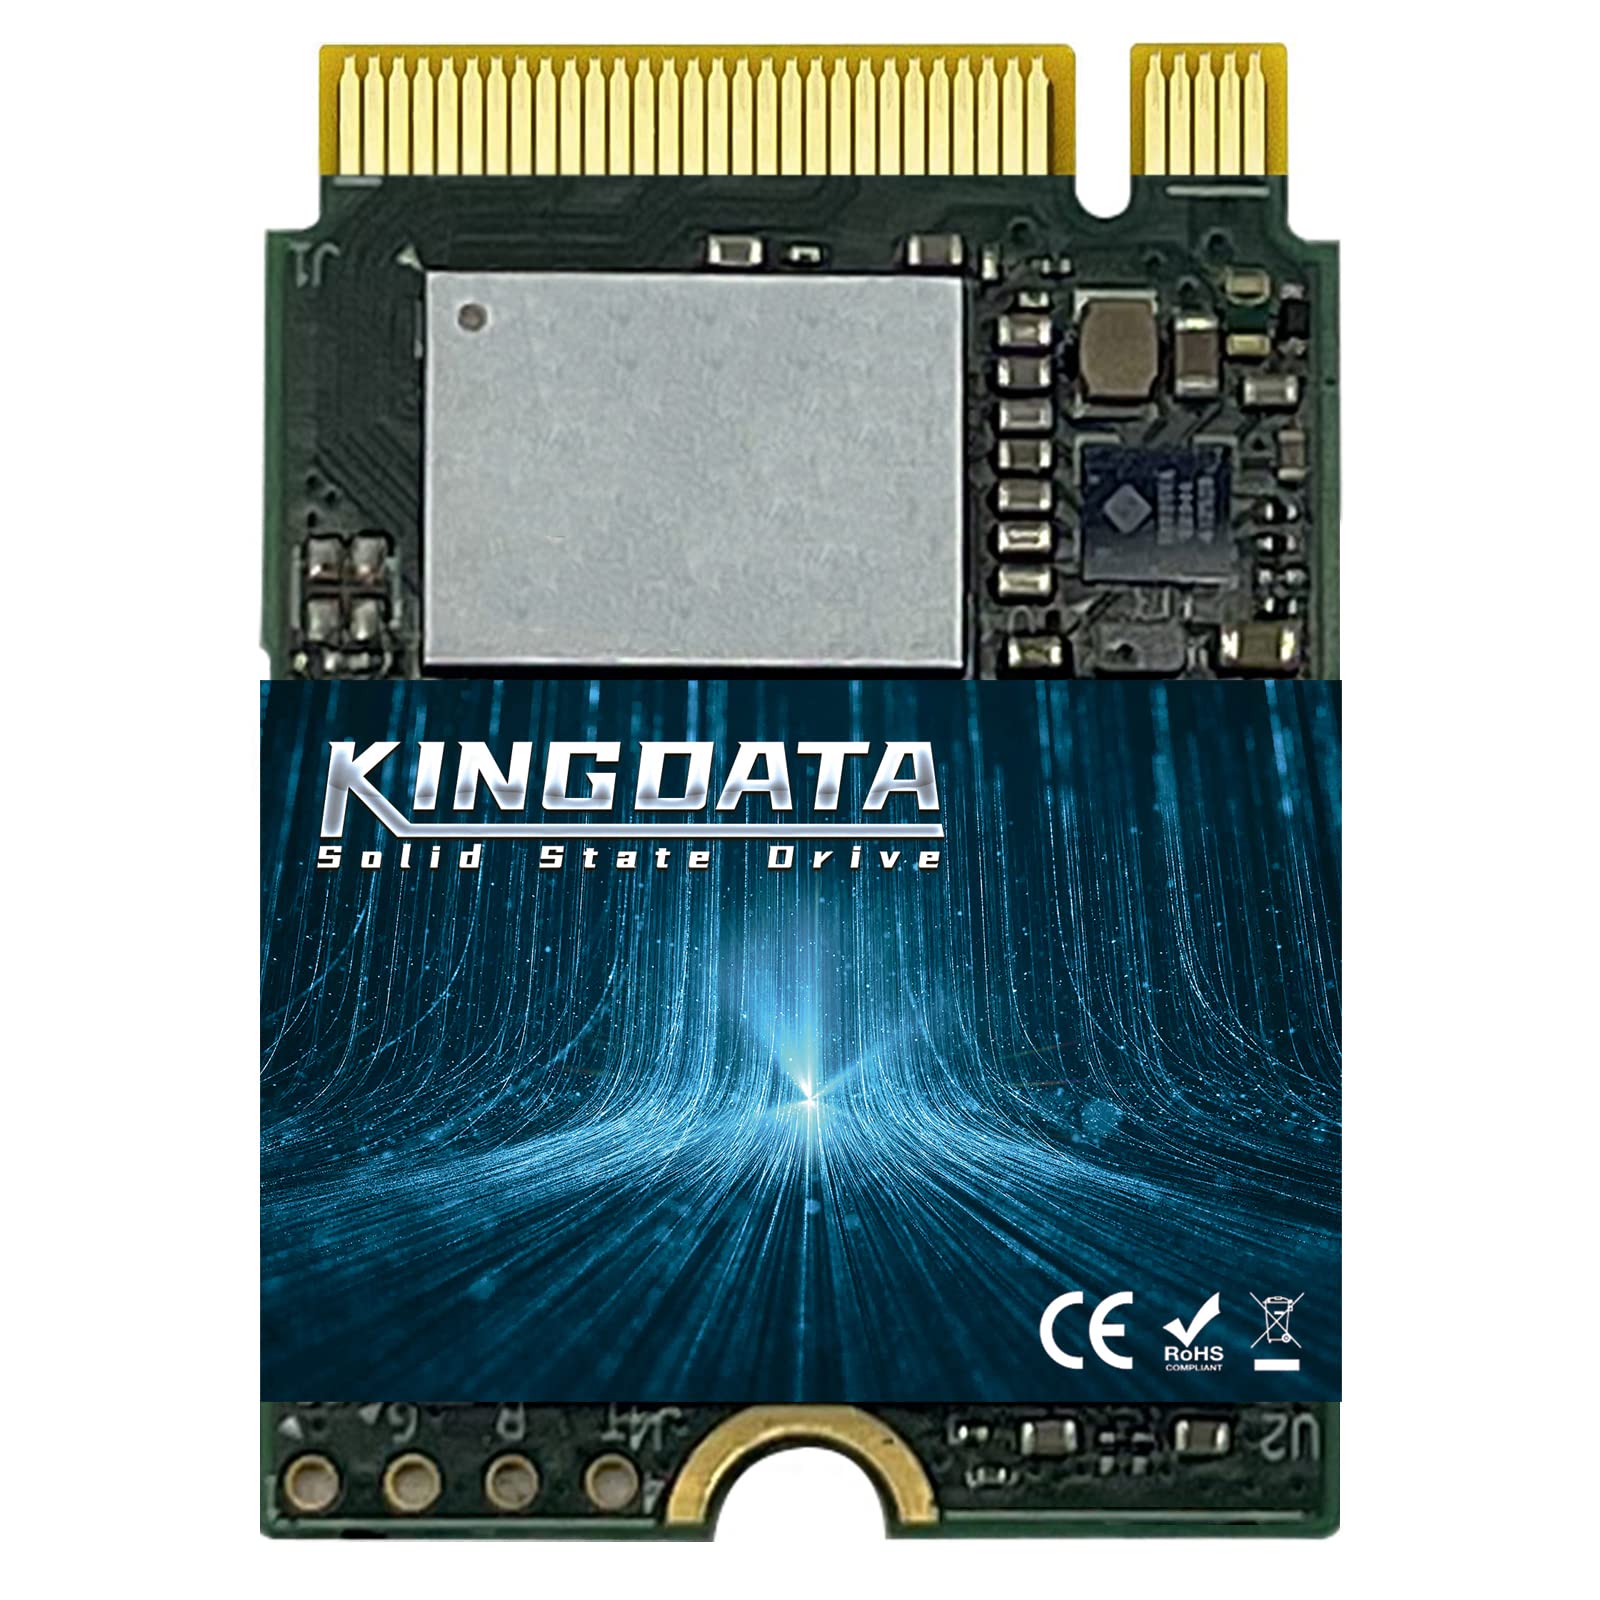 KINGDATA 1TB M.2 2230 NVMe PCIe SSD Gen 4.0X4 - Internal Solid State Drive Compatible with PS5 Steam Deck Microsoft Surface